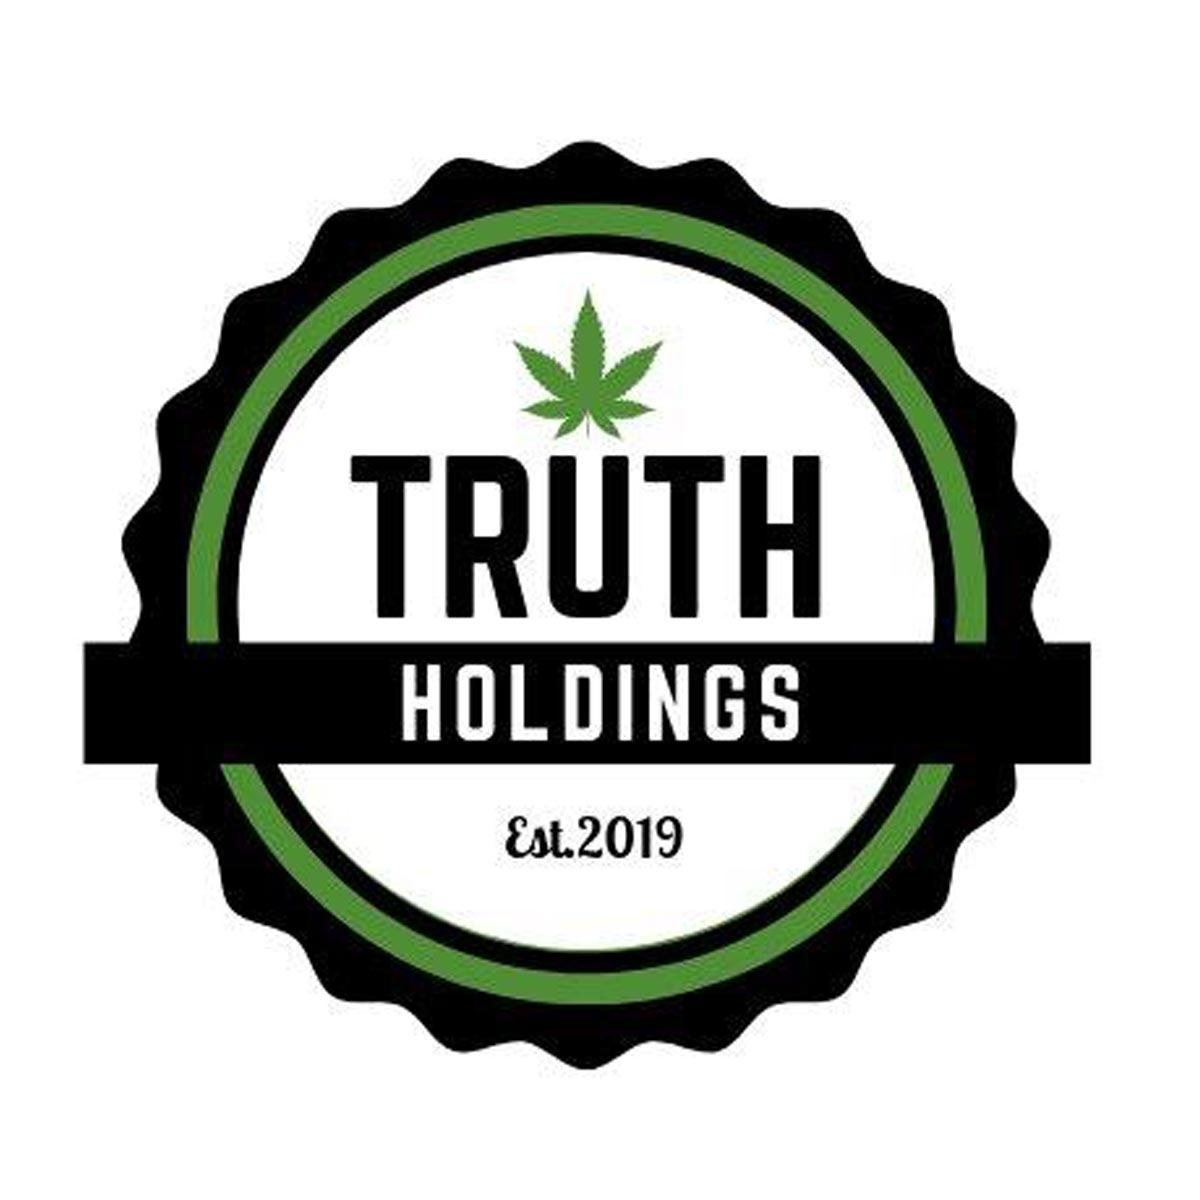 Truth Holdings